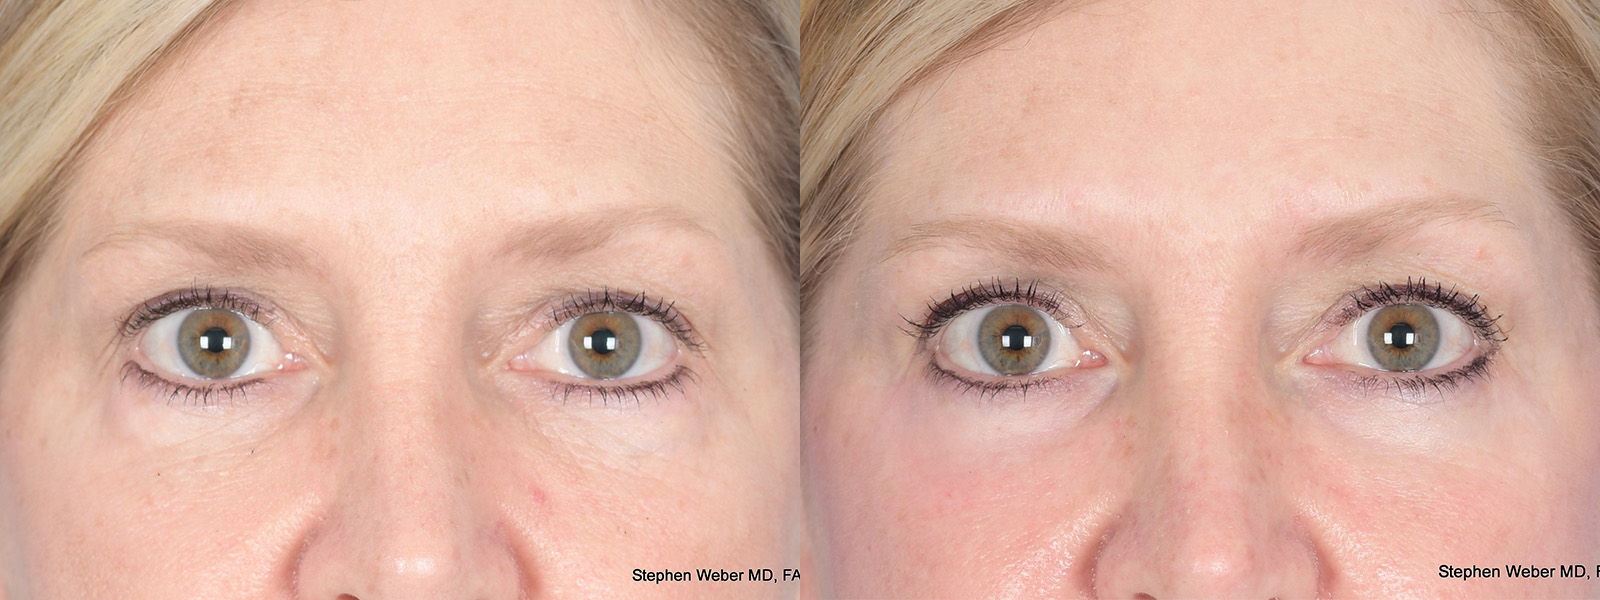 Before and After Eyelid Surgery in Denver 3